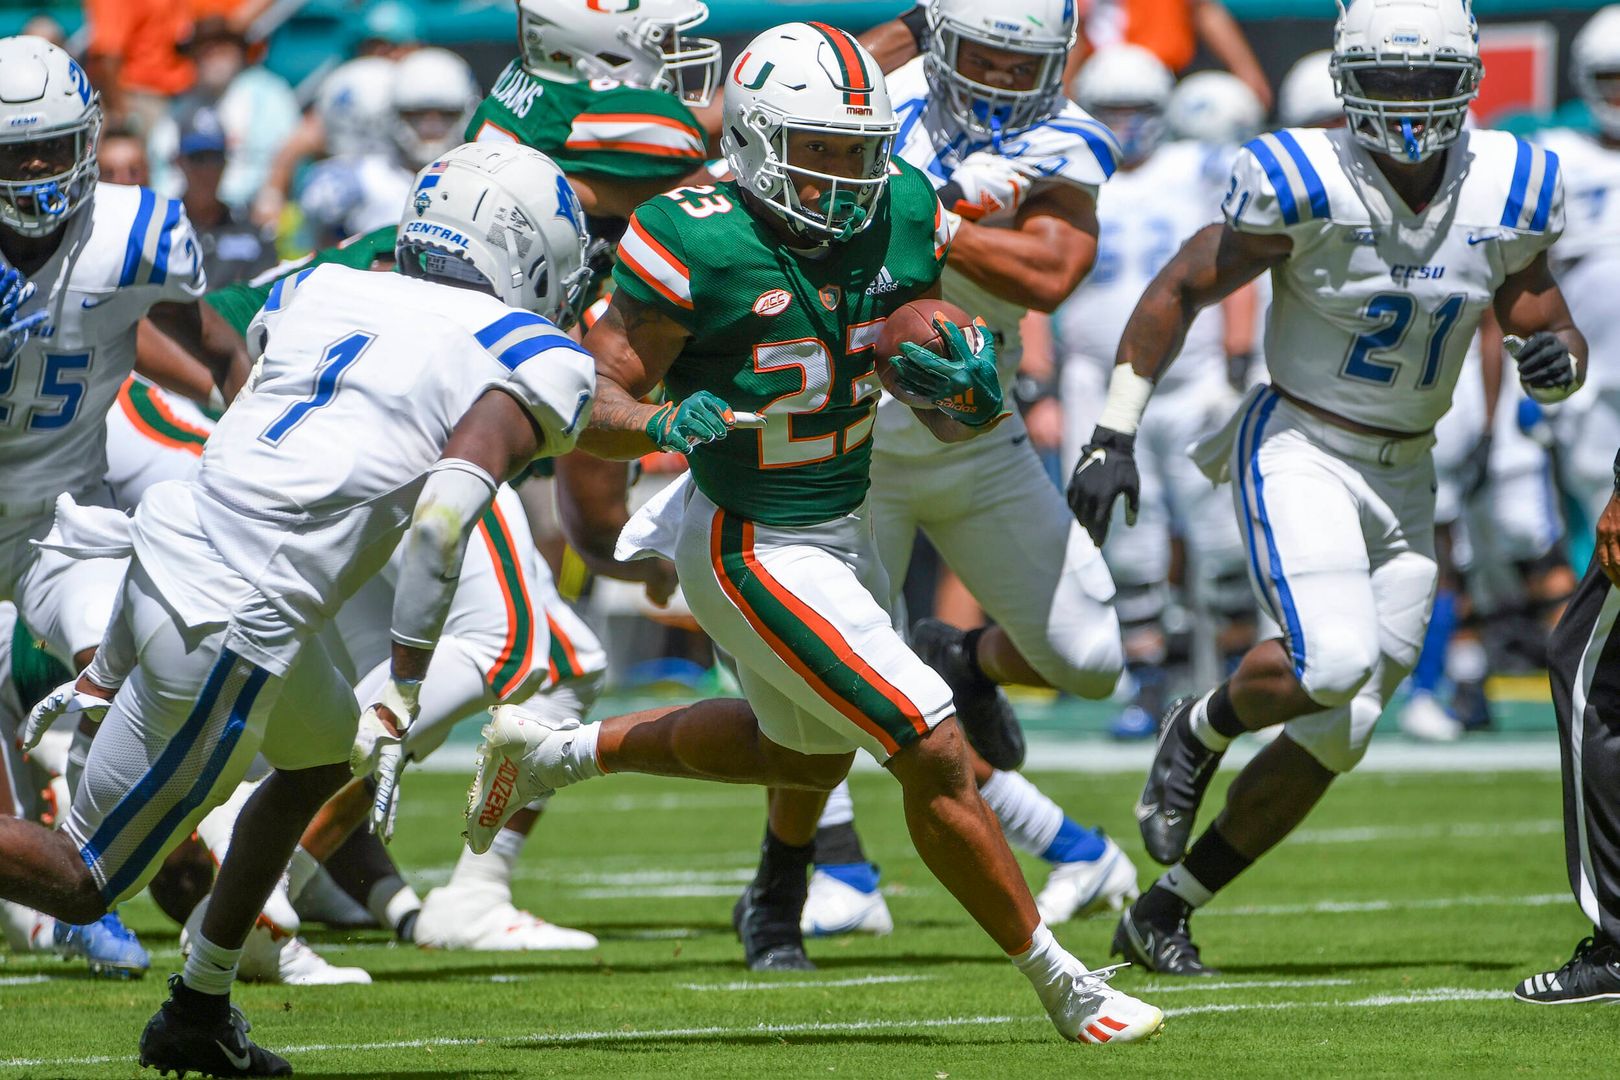 Photo Gallery: Canes Football vs. Central Connecticut State